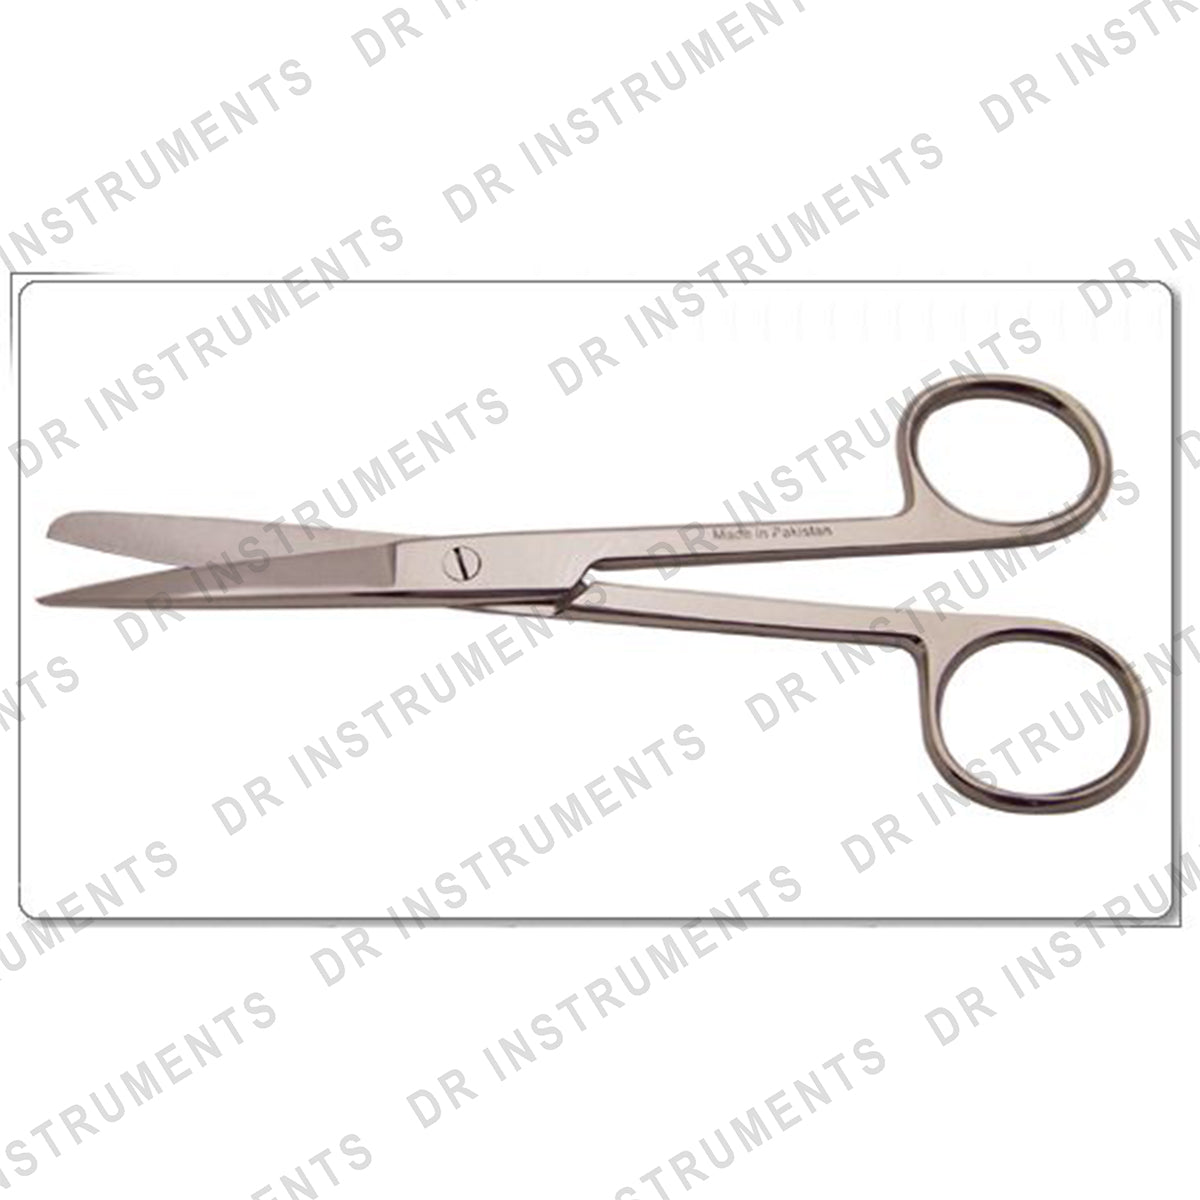 DR Instruments Surgical Scissors with Sharp Blunt Points, Stainless Steel